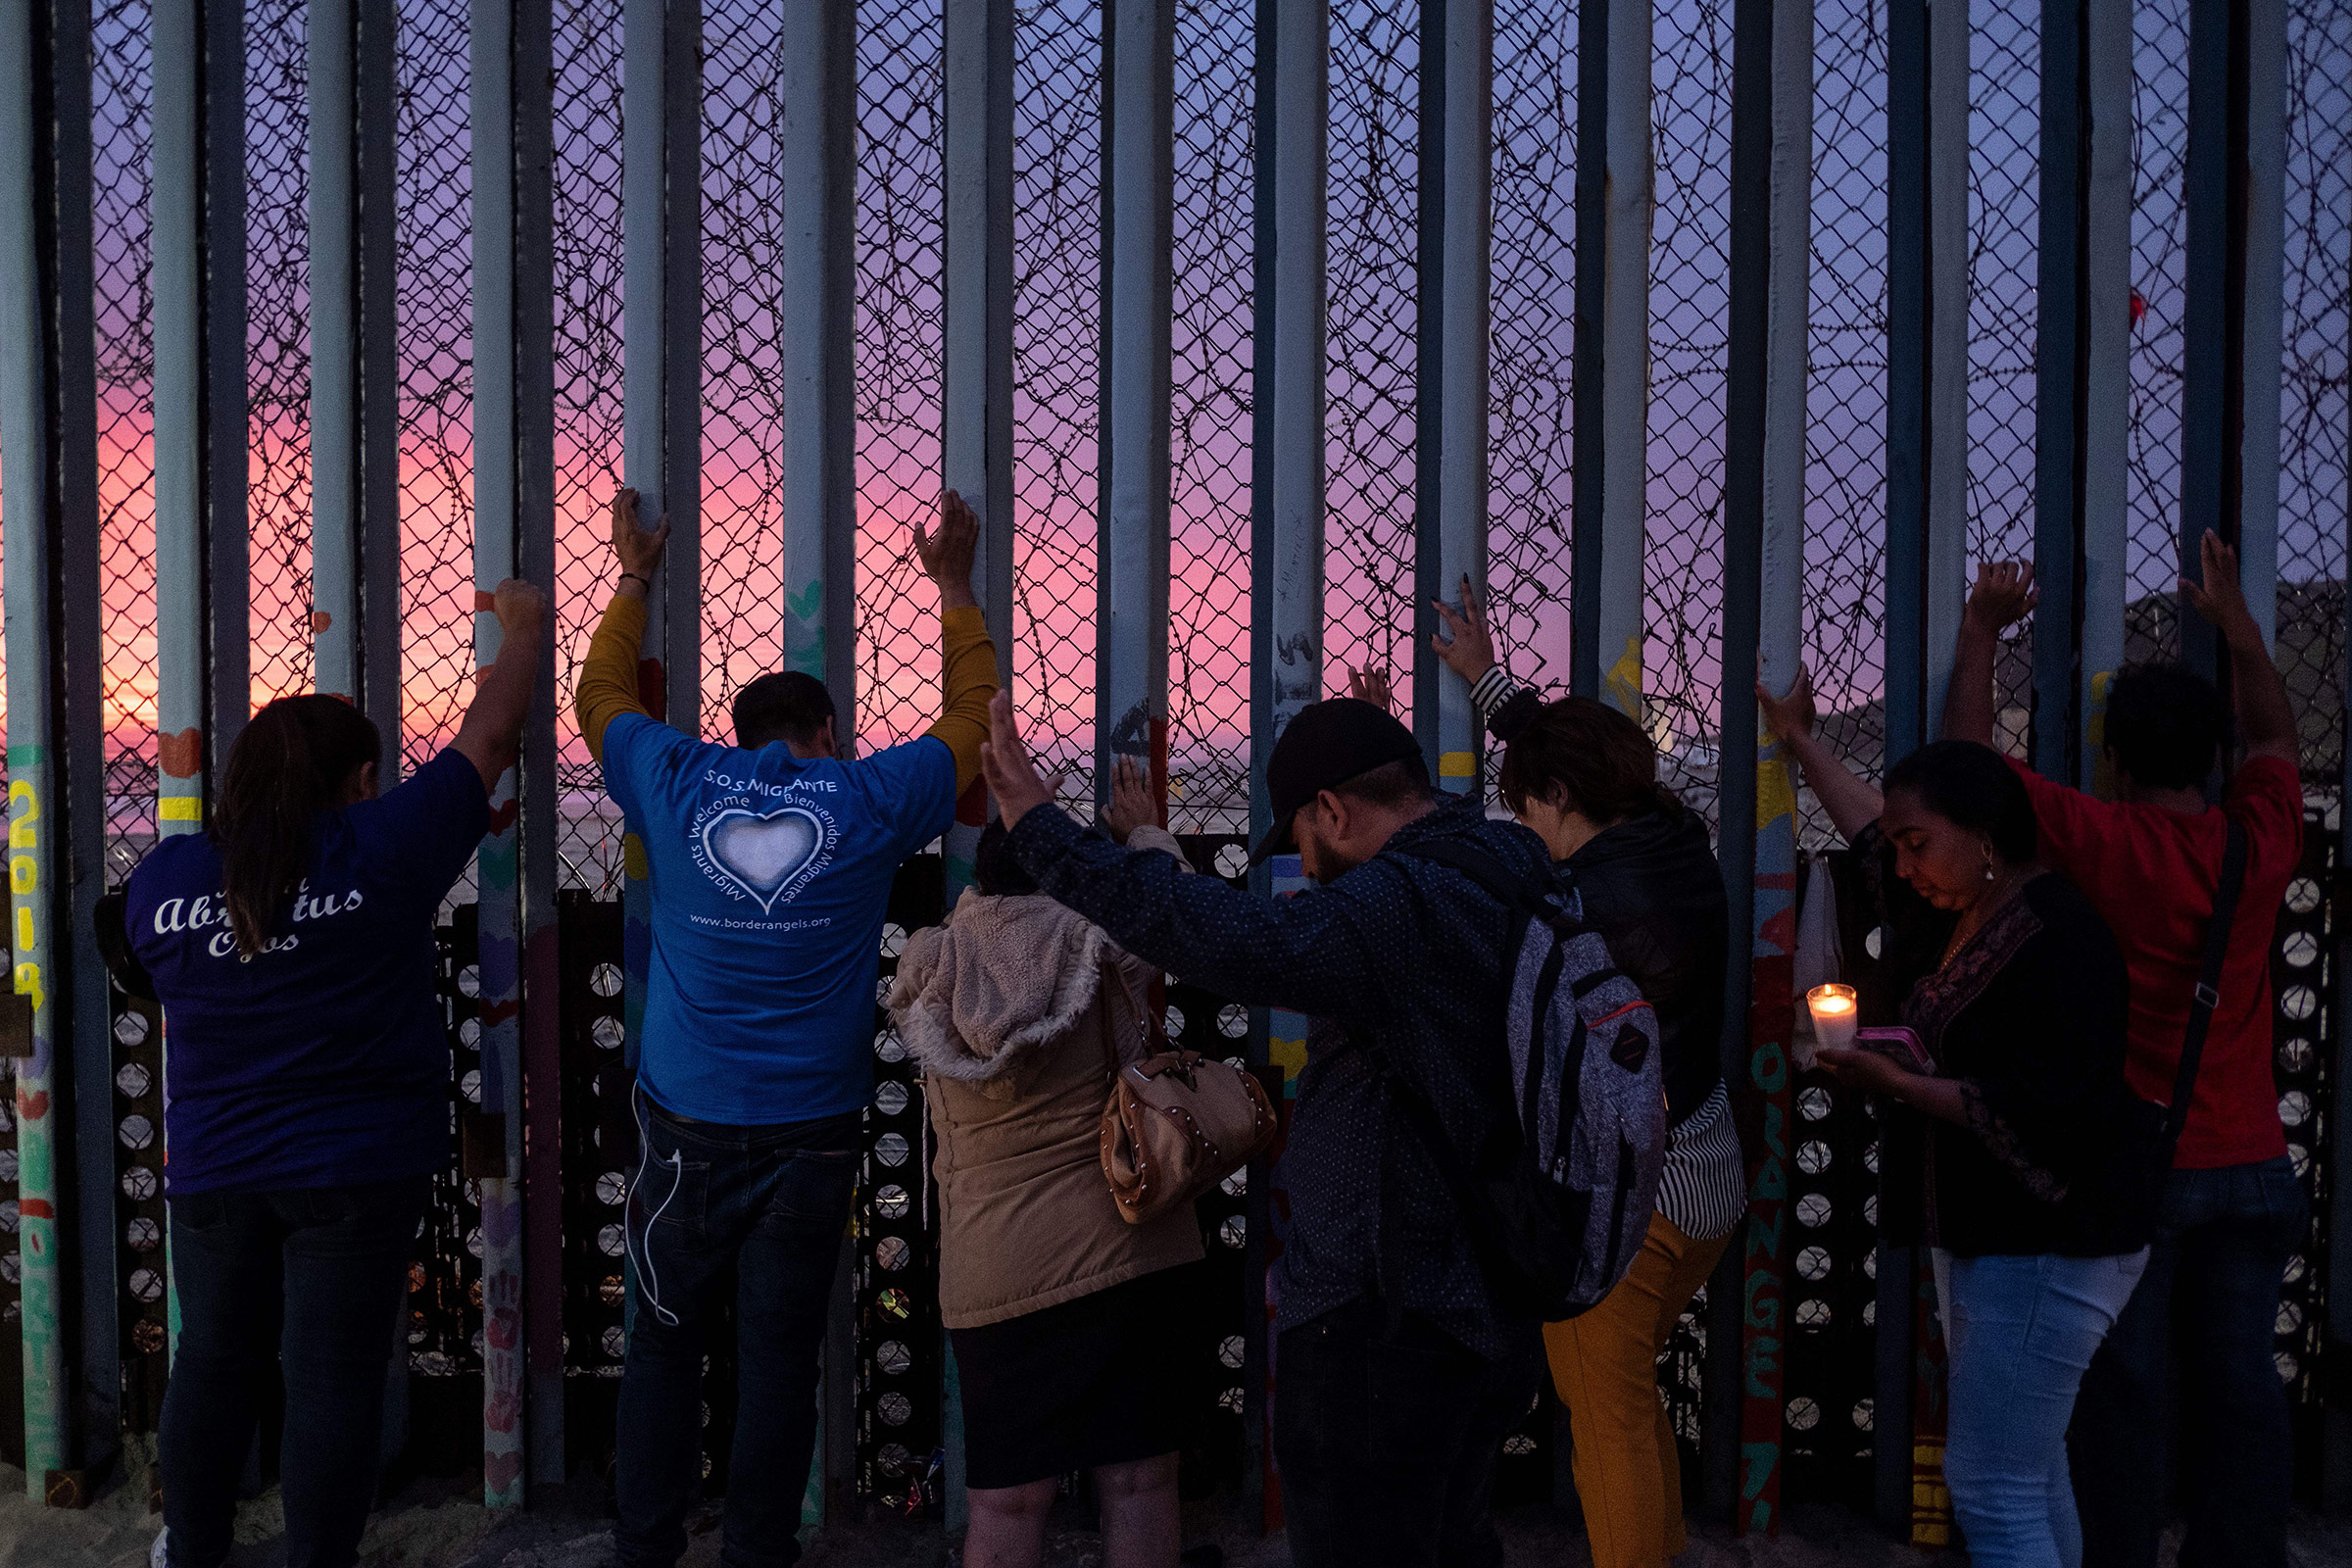 Migrants, advocates and attendees take part in an event called "Clamor for those who didn't achieve the dream" at the U.S.-Mexico border in Playas de Tijuana, Baja California state, Mexico, on June 29, 2019. (Guillermo Arias—AFP/Getty Images)